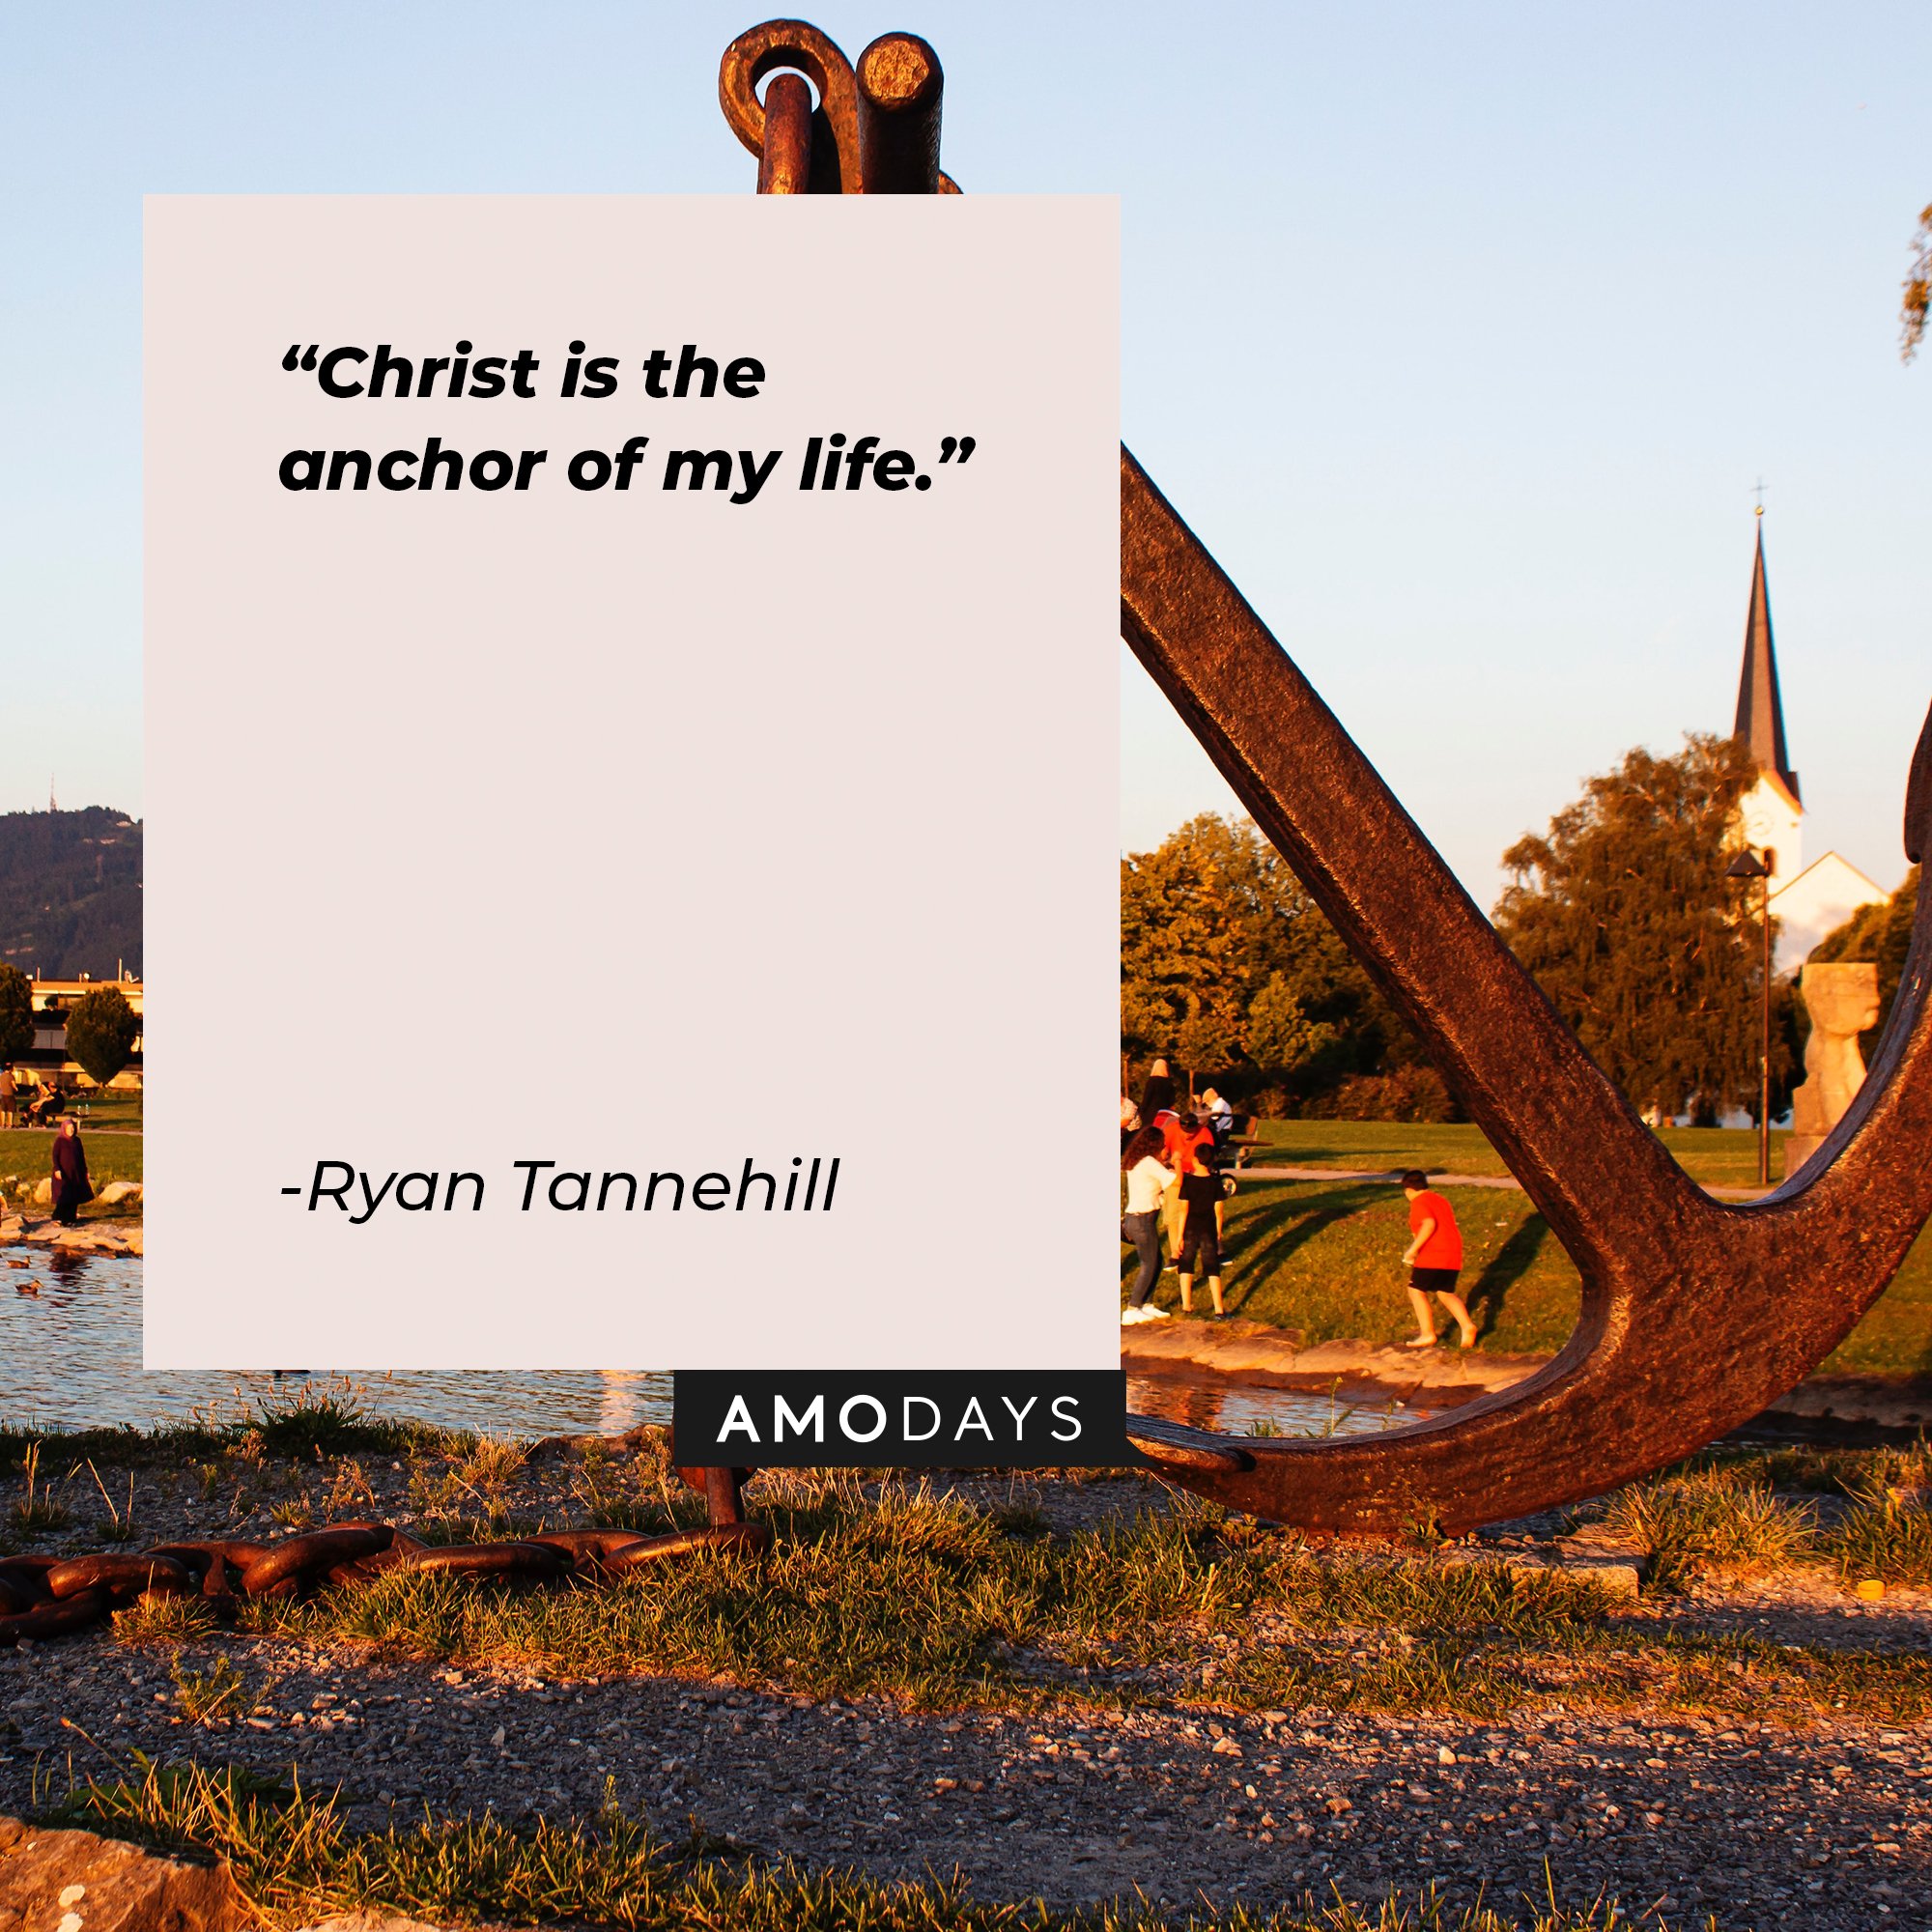 Ryan Tannehill's quote: "Christ is the anchor of my life." | Image: AmoDays